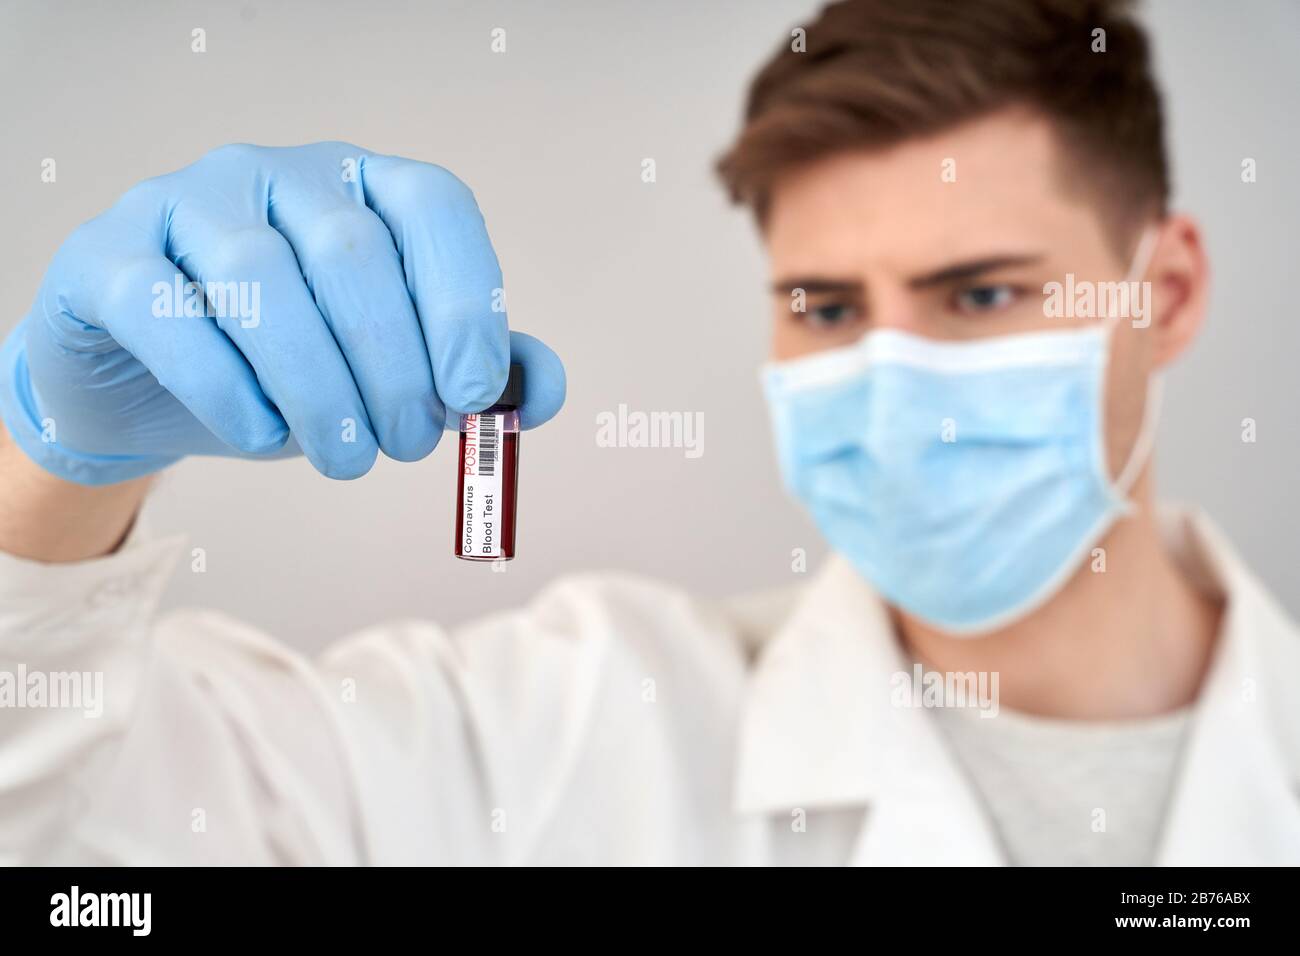 Man doctor wearing white robe and medical face mask standing isolated on gray backround holding virus in bulb close-up blurred pensive Stock Photo